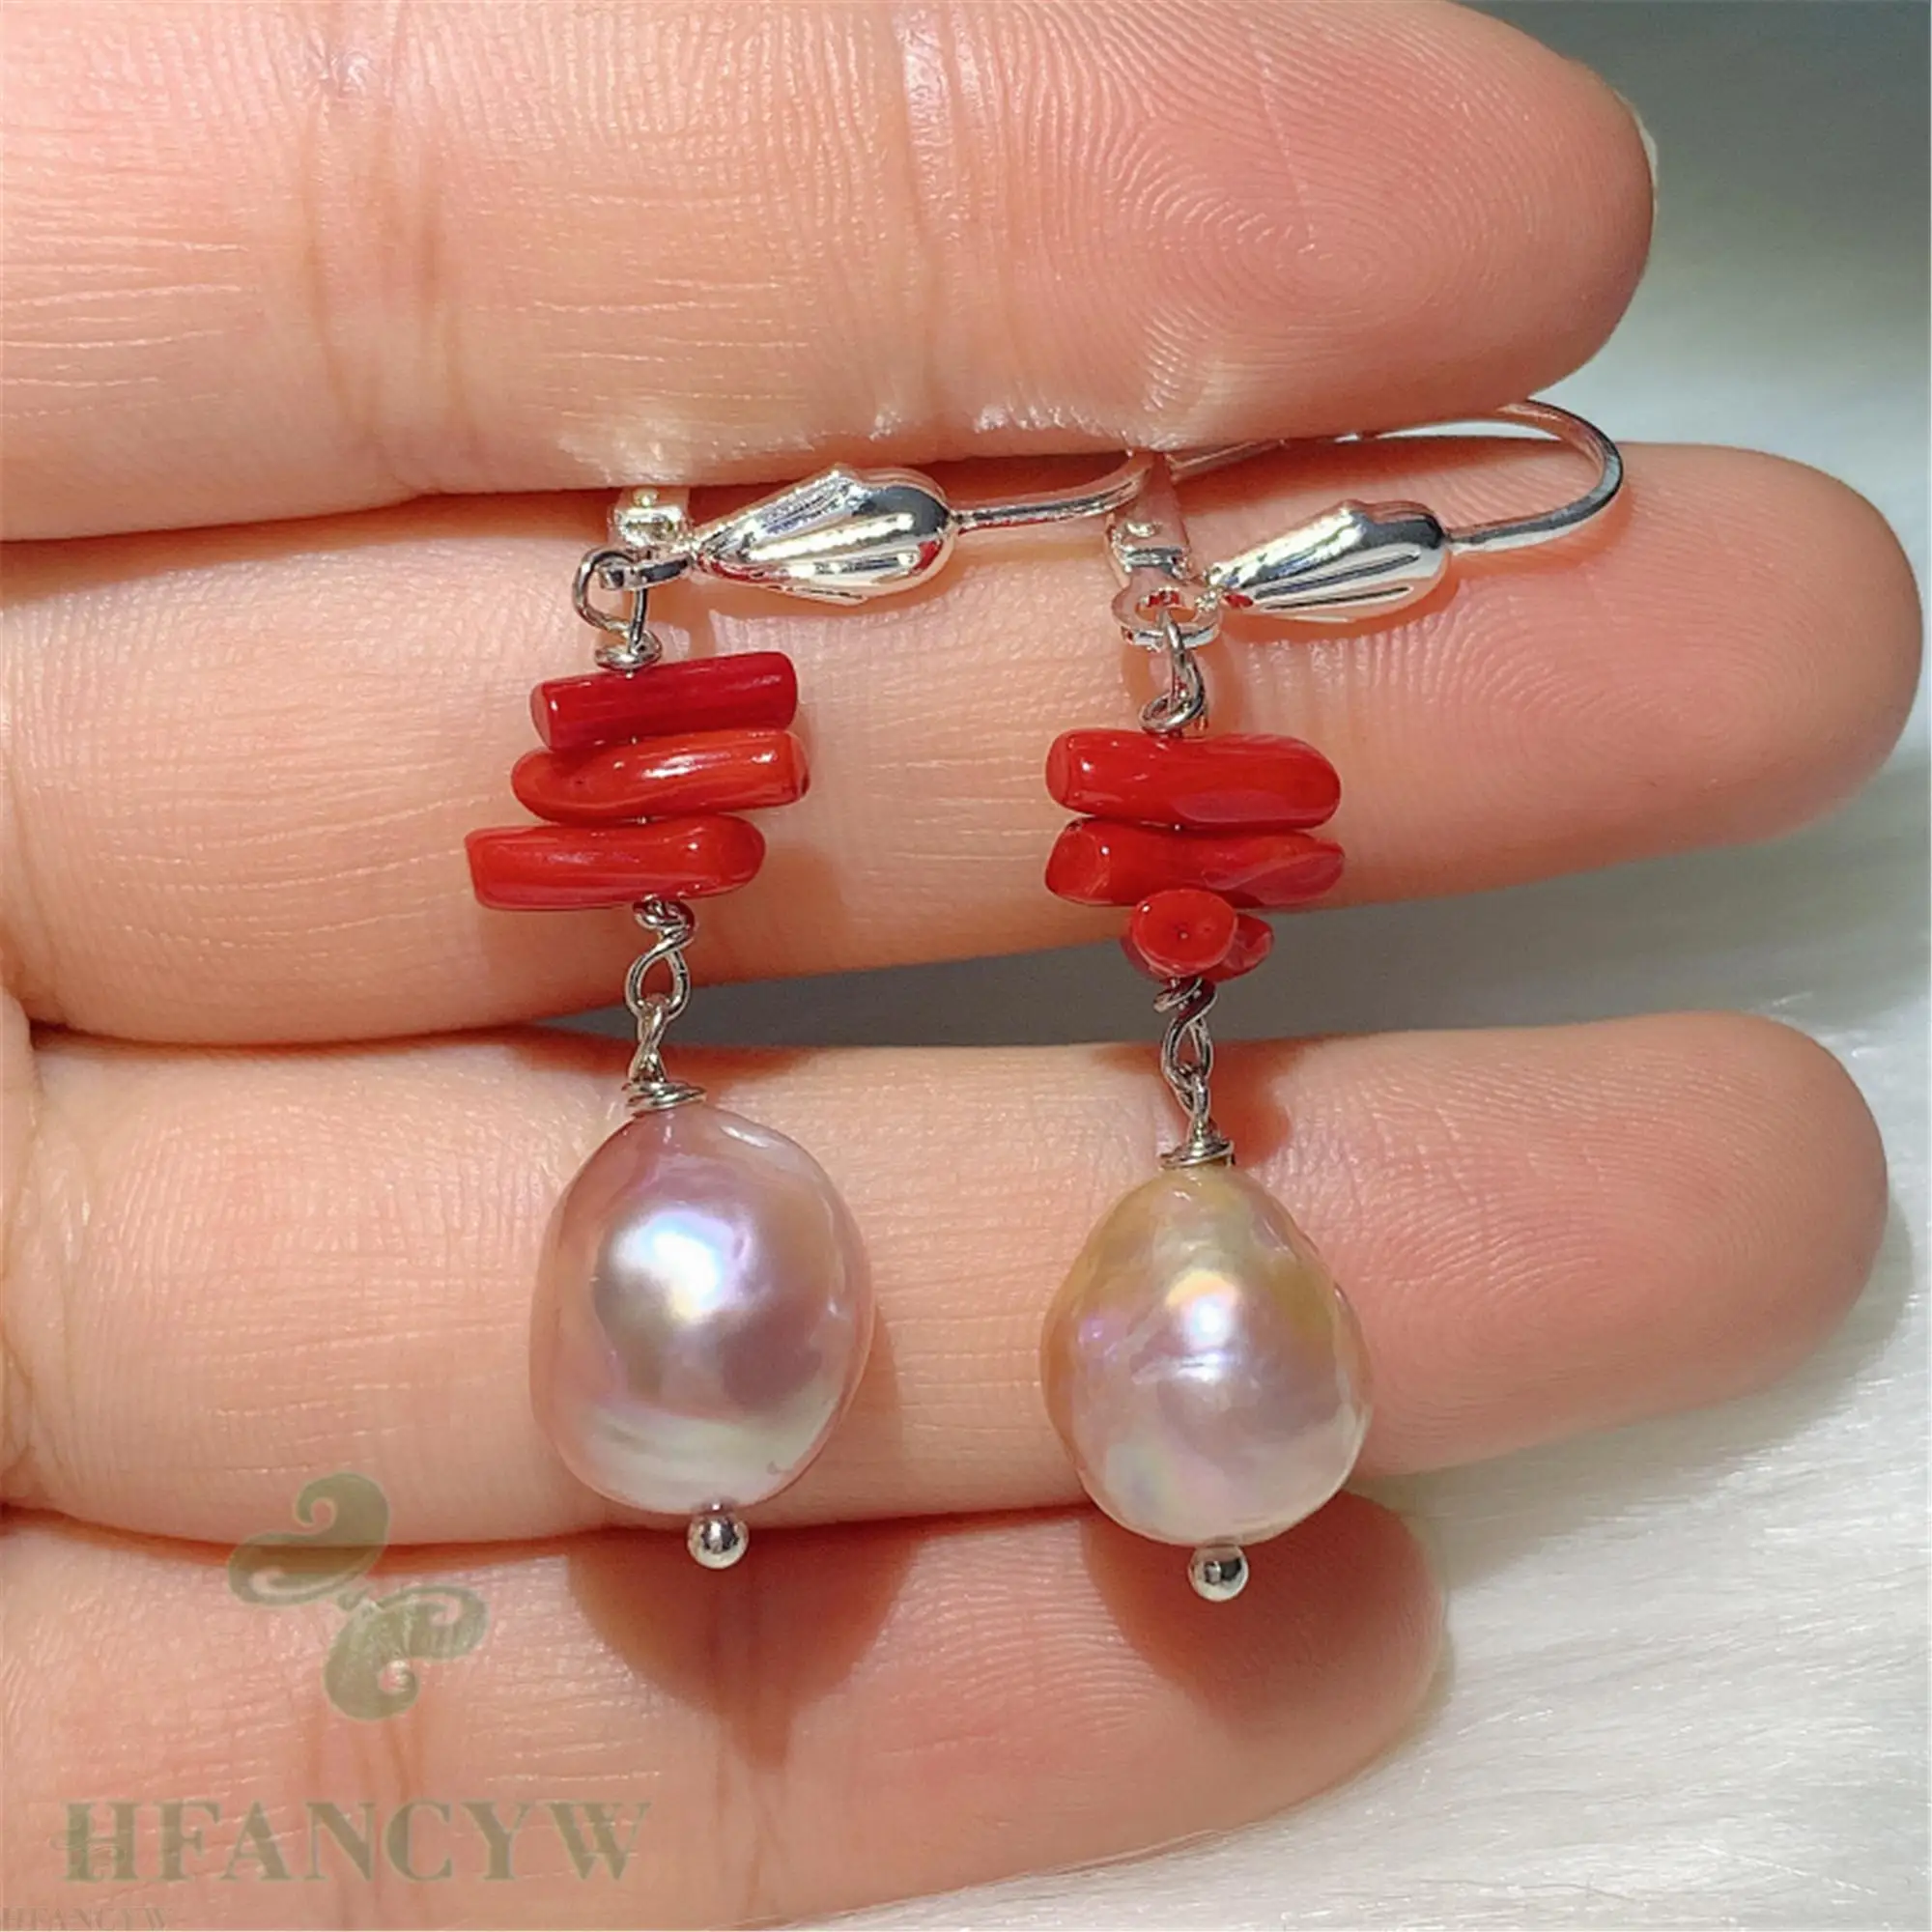 10-12mm Multi-Color Baroque Pearl Earring 18k Ear Stud Accessories Gift Jewelry Natural Cultured Aurora Women Party Dangle